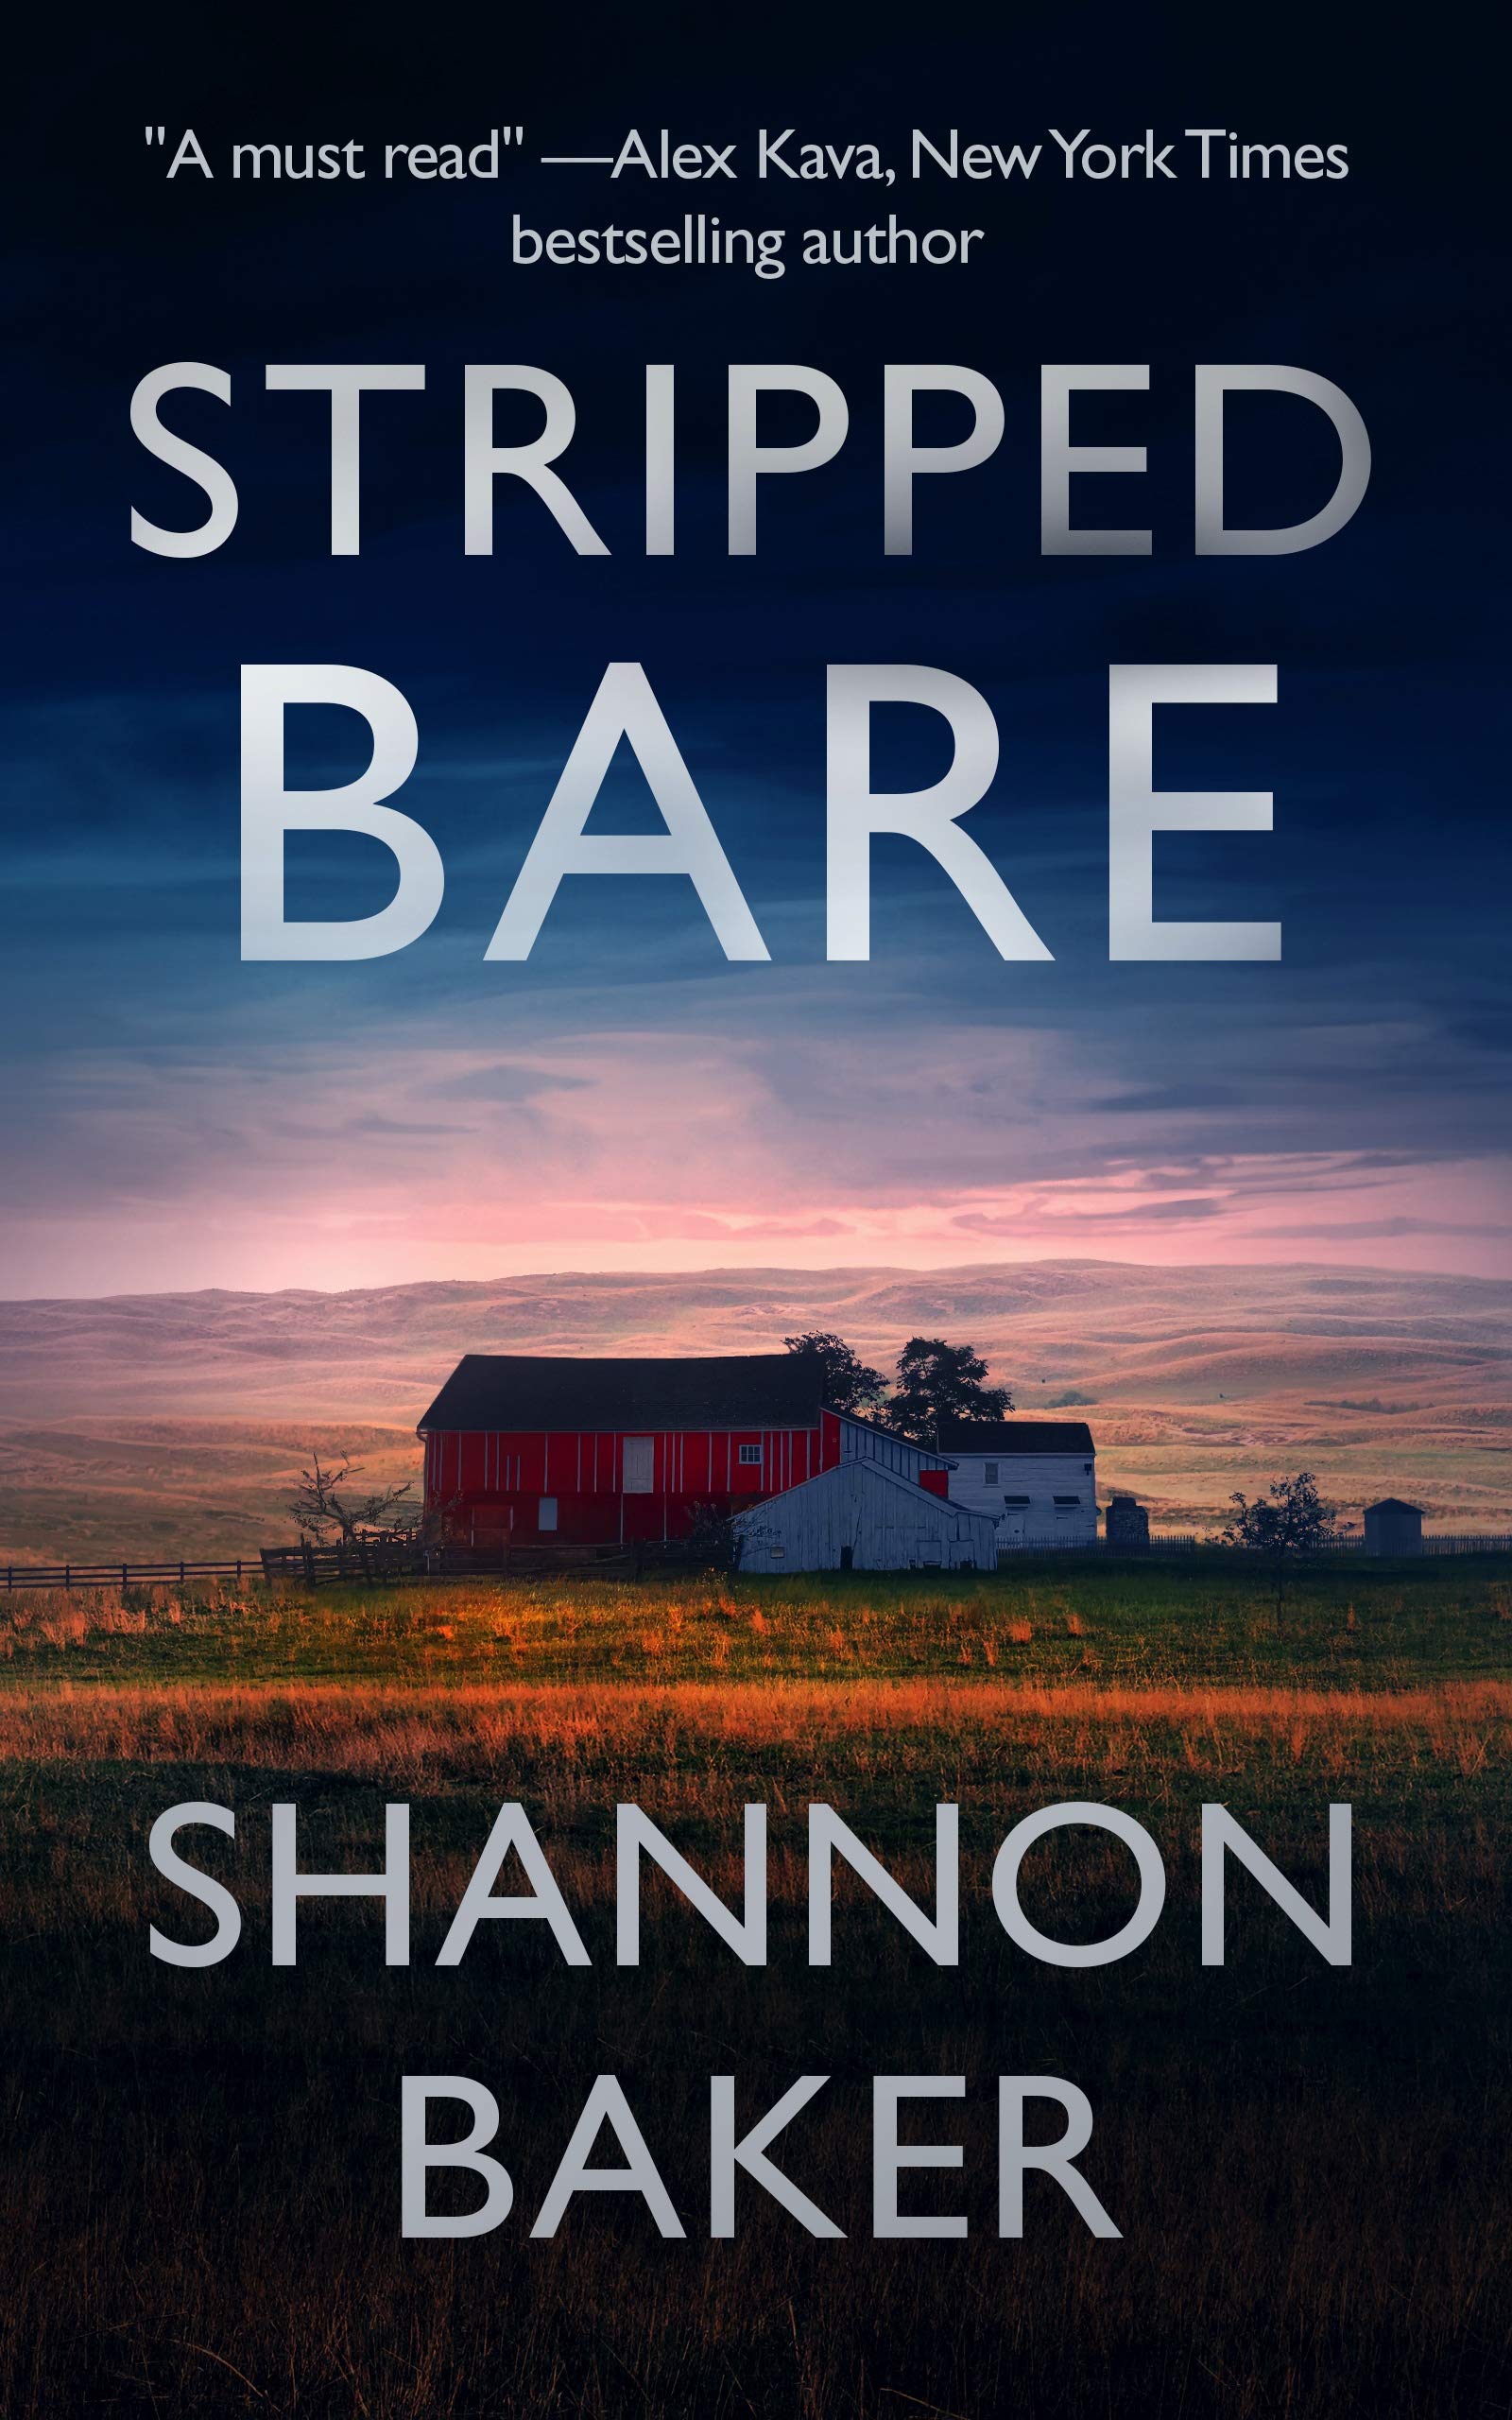 Stripped Bare (Kate Fox Book 1)